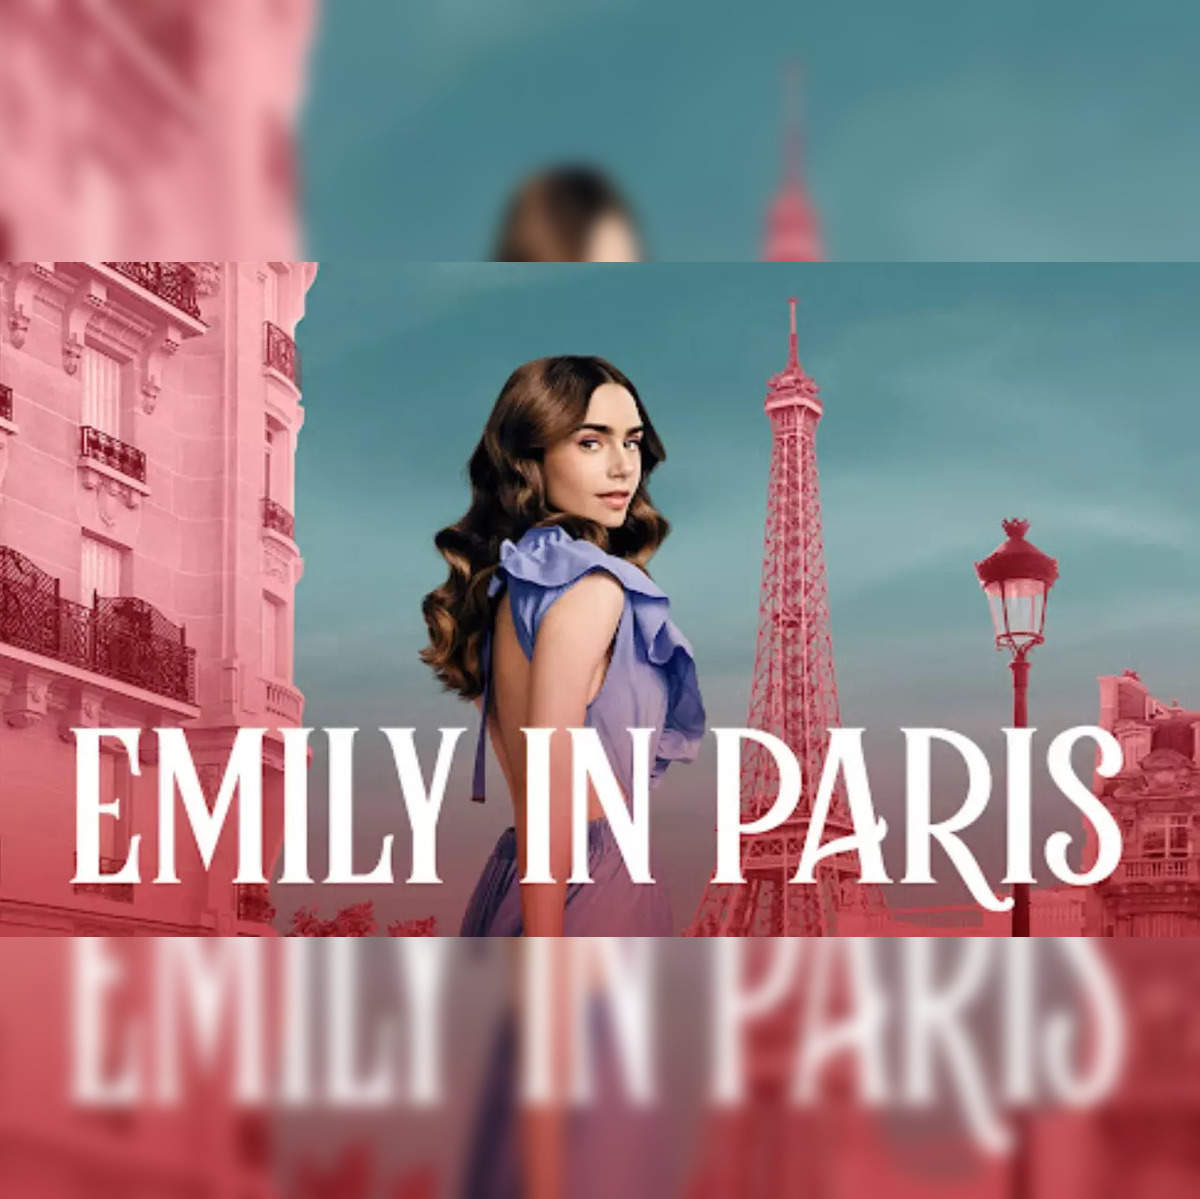 All The Latest Updates From Emily in Paris Season 2